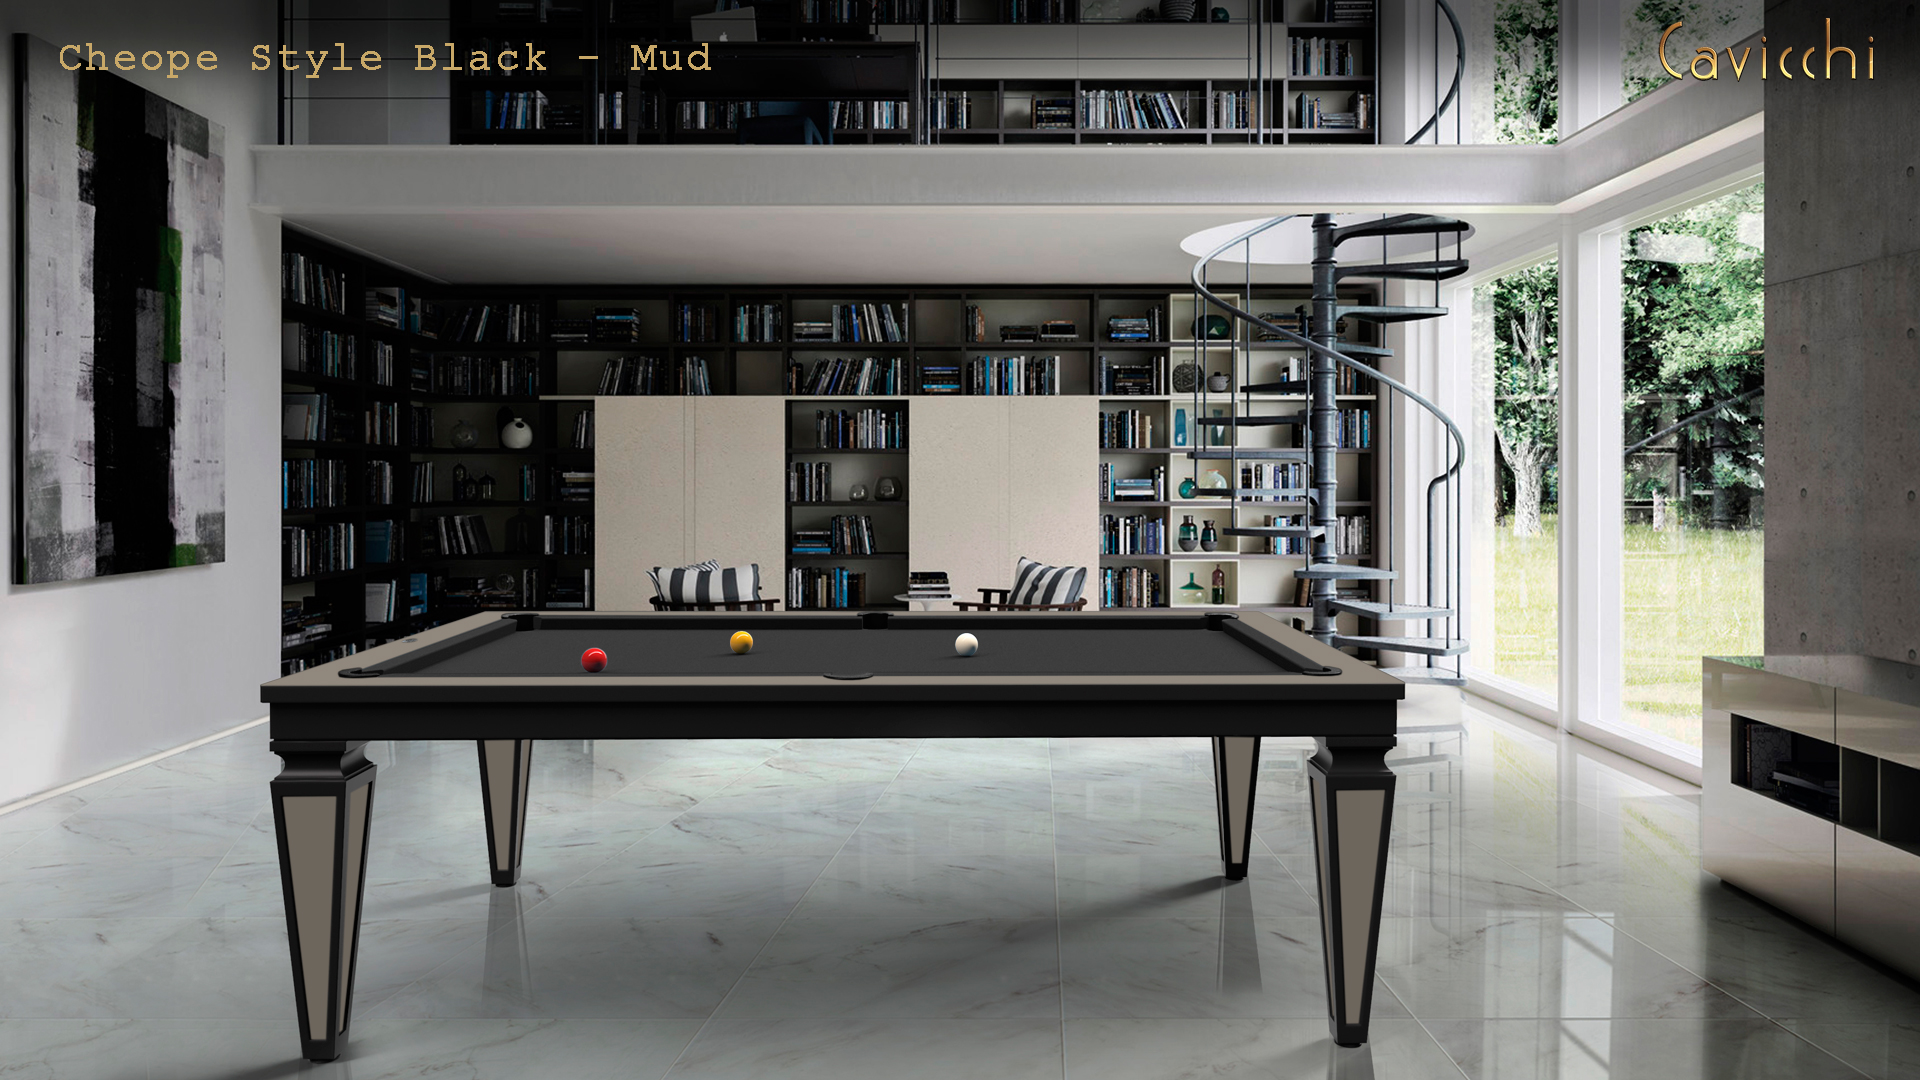 Cavicchi Cheope Style Black Pool Table 1